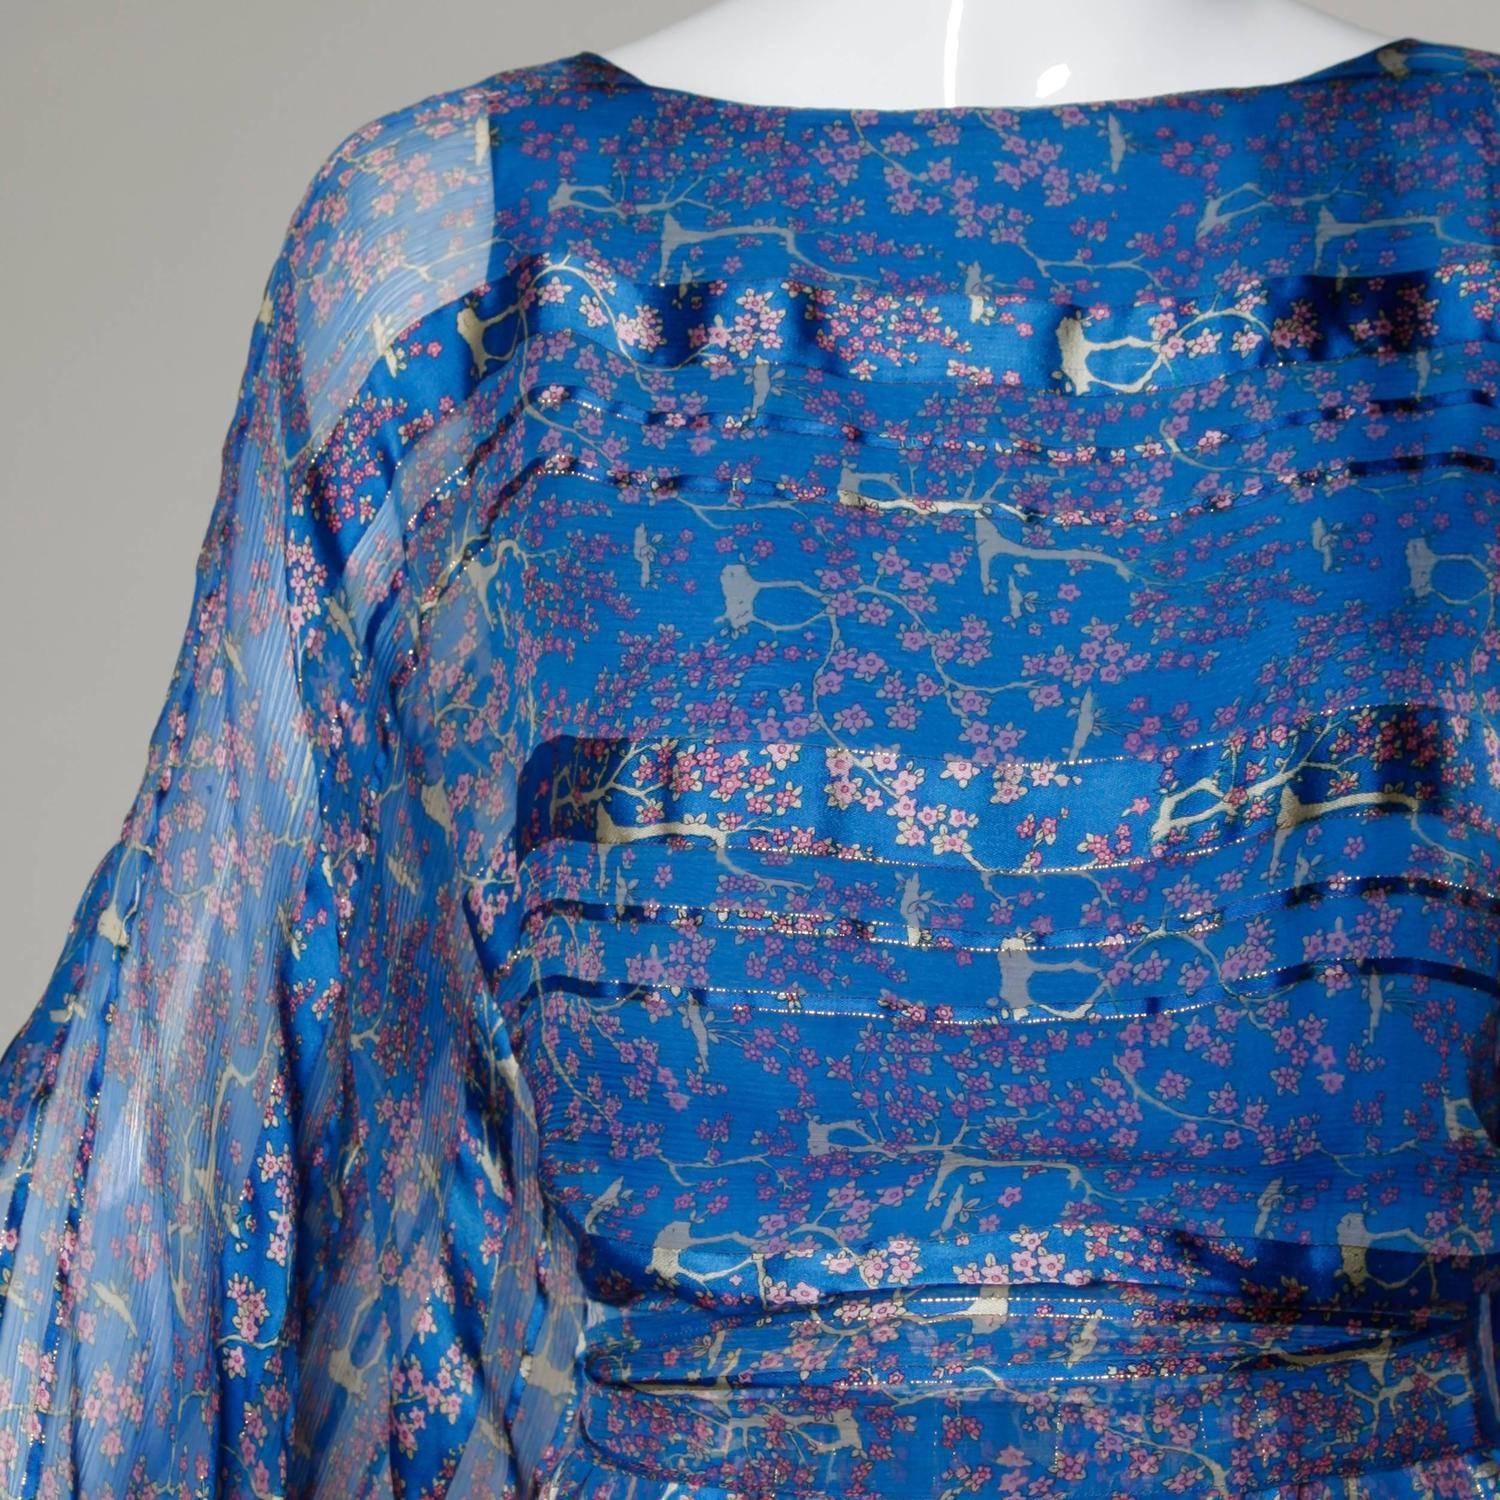 Delicate paper thin silk dress in shimmery blue with a cherry blossom floral print, huge billowy batwing sleeves and matching sash. The fabric on this dress is completely amazing!

Details: 

Fully Lined
Top Back Button Closure
Marked Size: